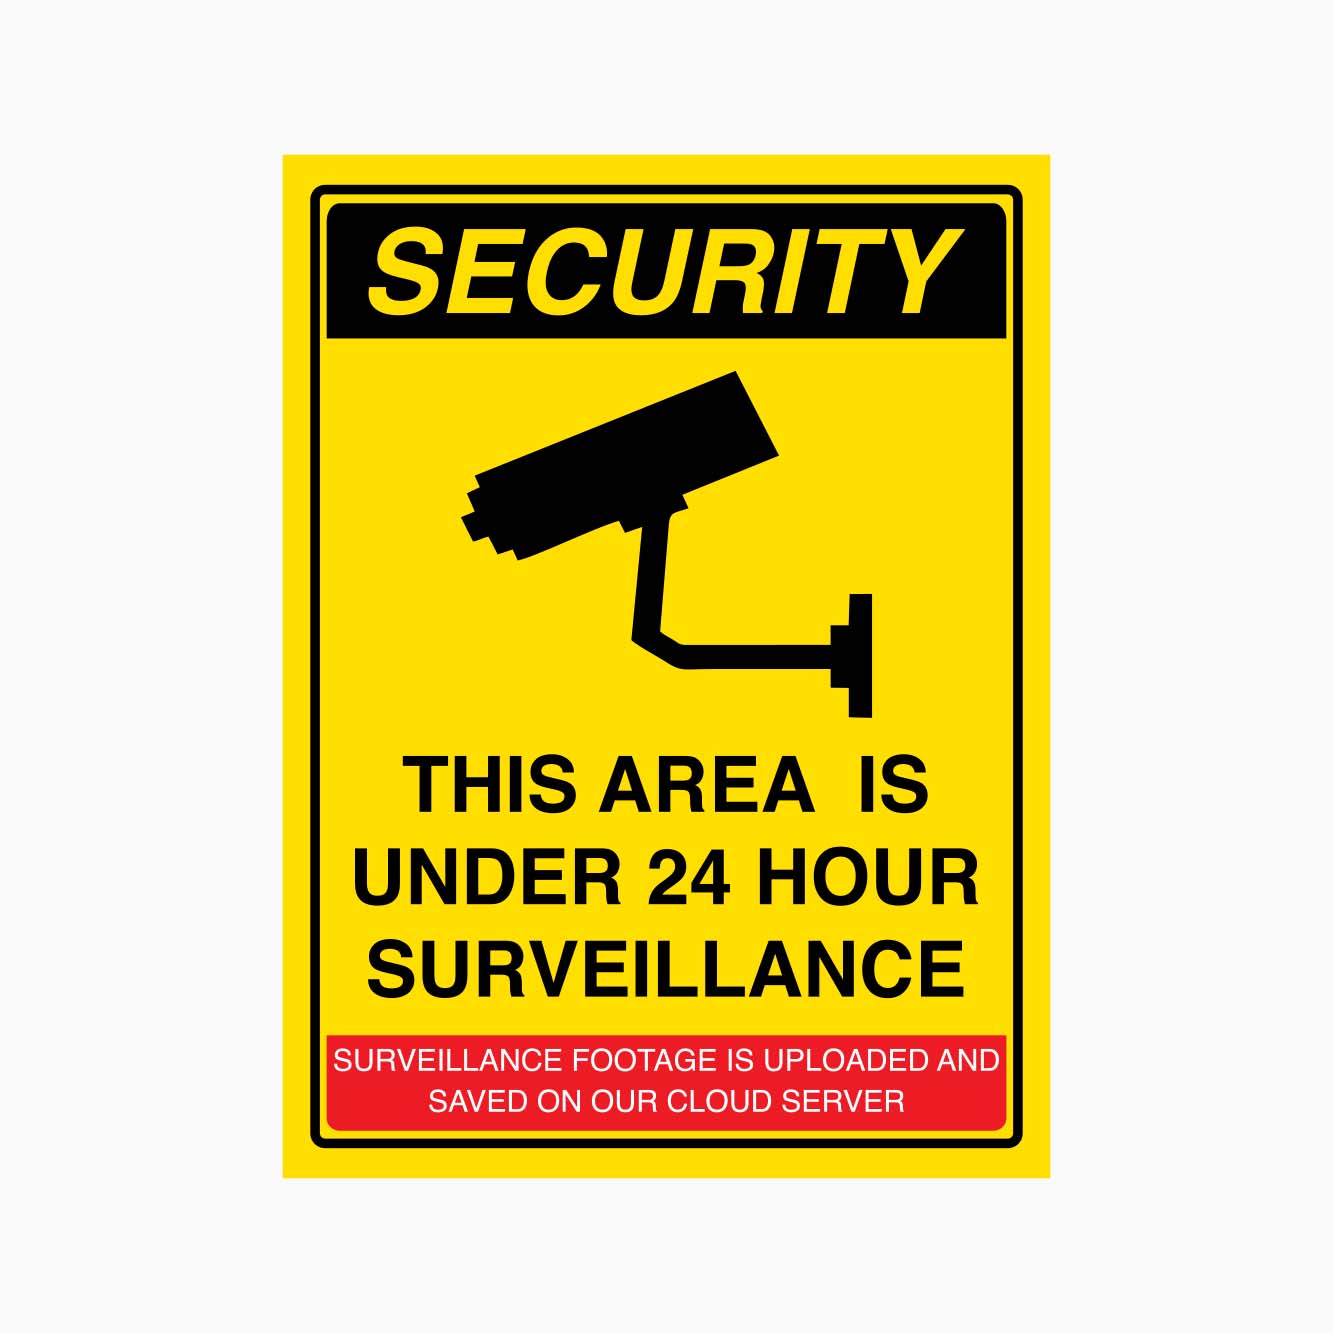 SECURITY THIS AREA IS UNDER 24 HOUR SURVEILLANCE SIGN - GET SIGNS